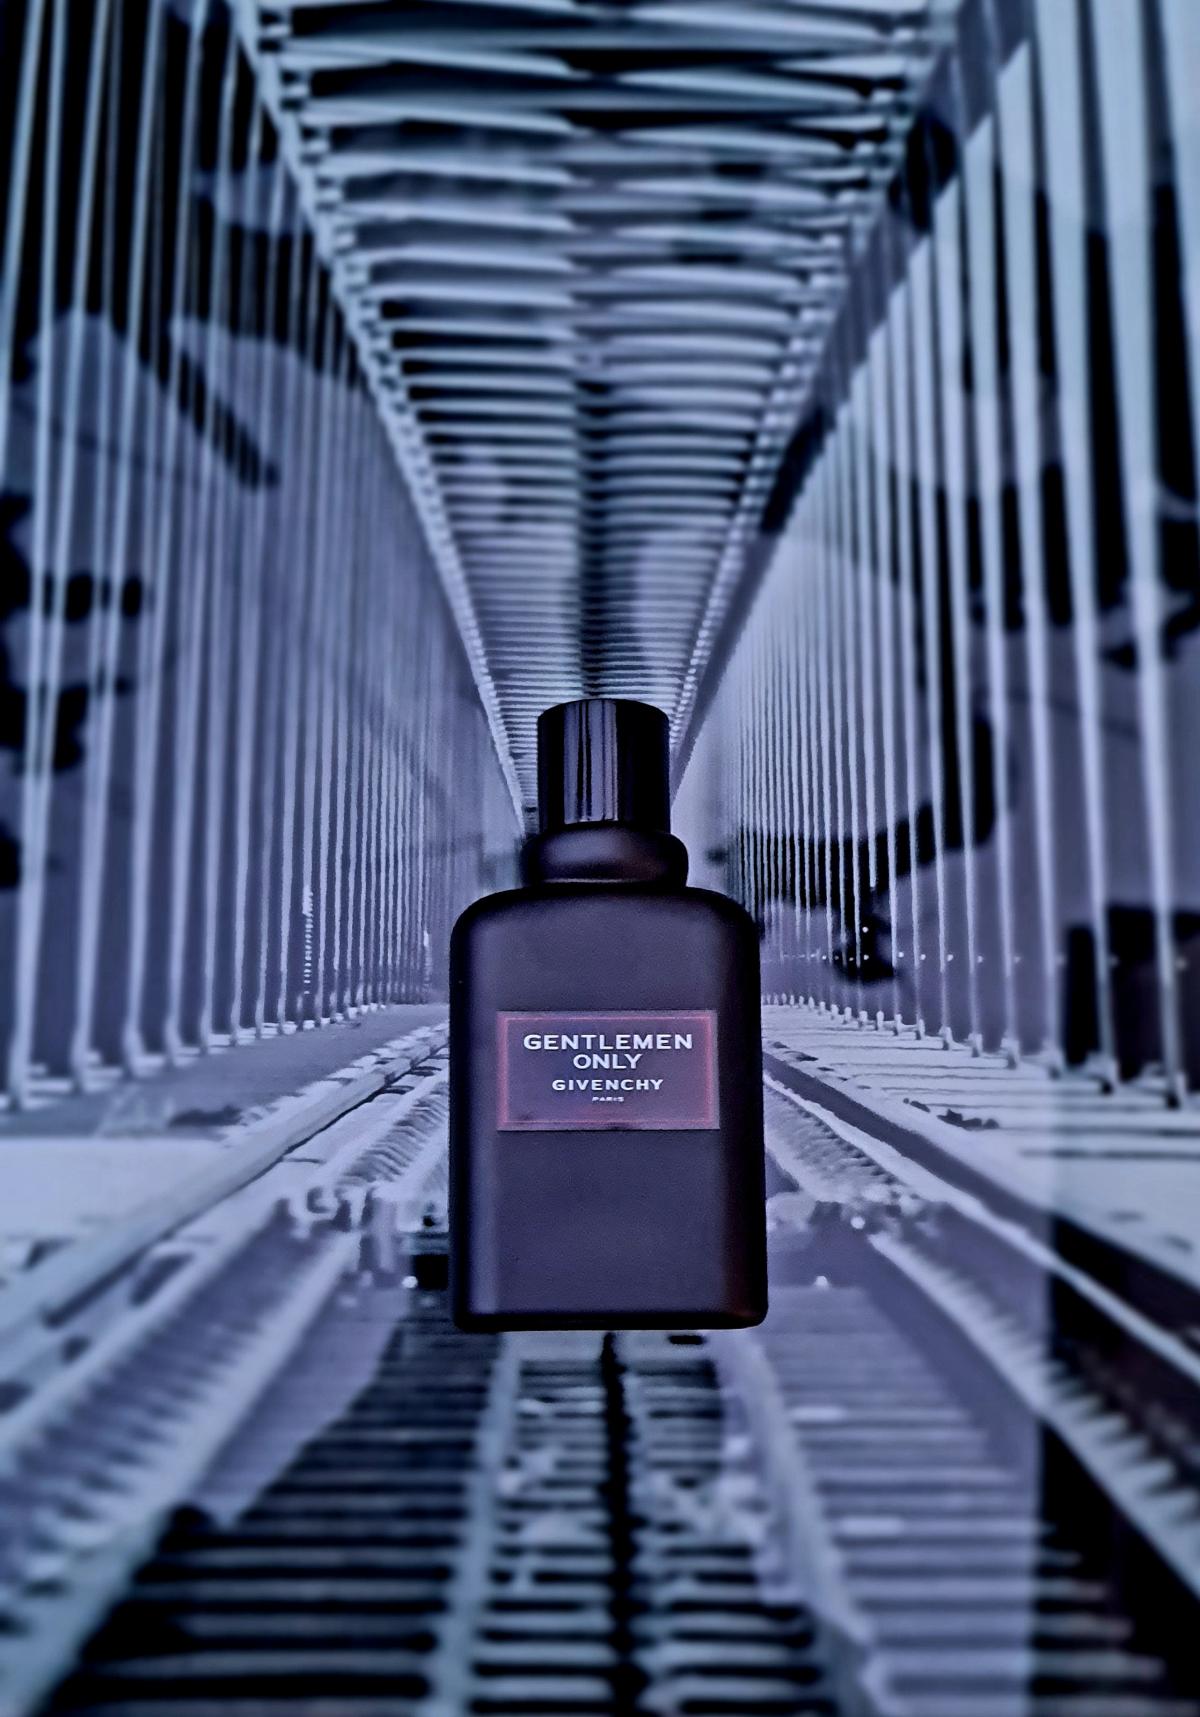 Only absolute. Givenchy Gentlemen only absolute. Givenchy Gentlemen only absolute 100 ml тестер. Gentlemen only Givenchy 2016. Givenchy Gentlemen only.